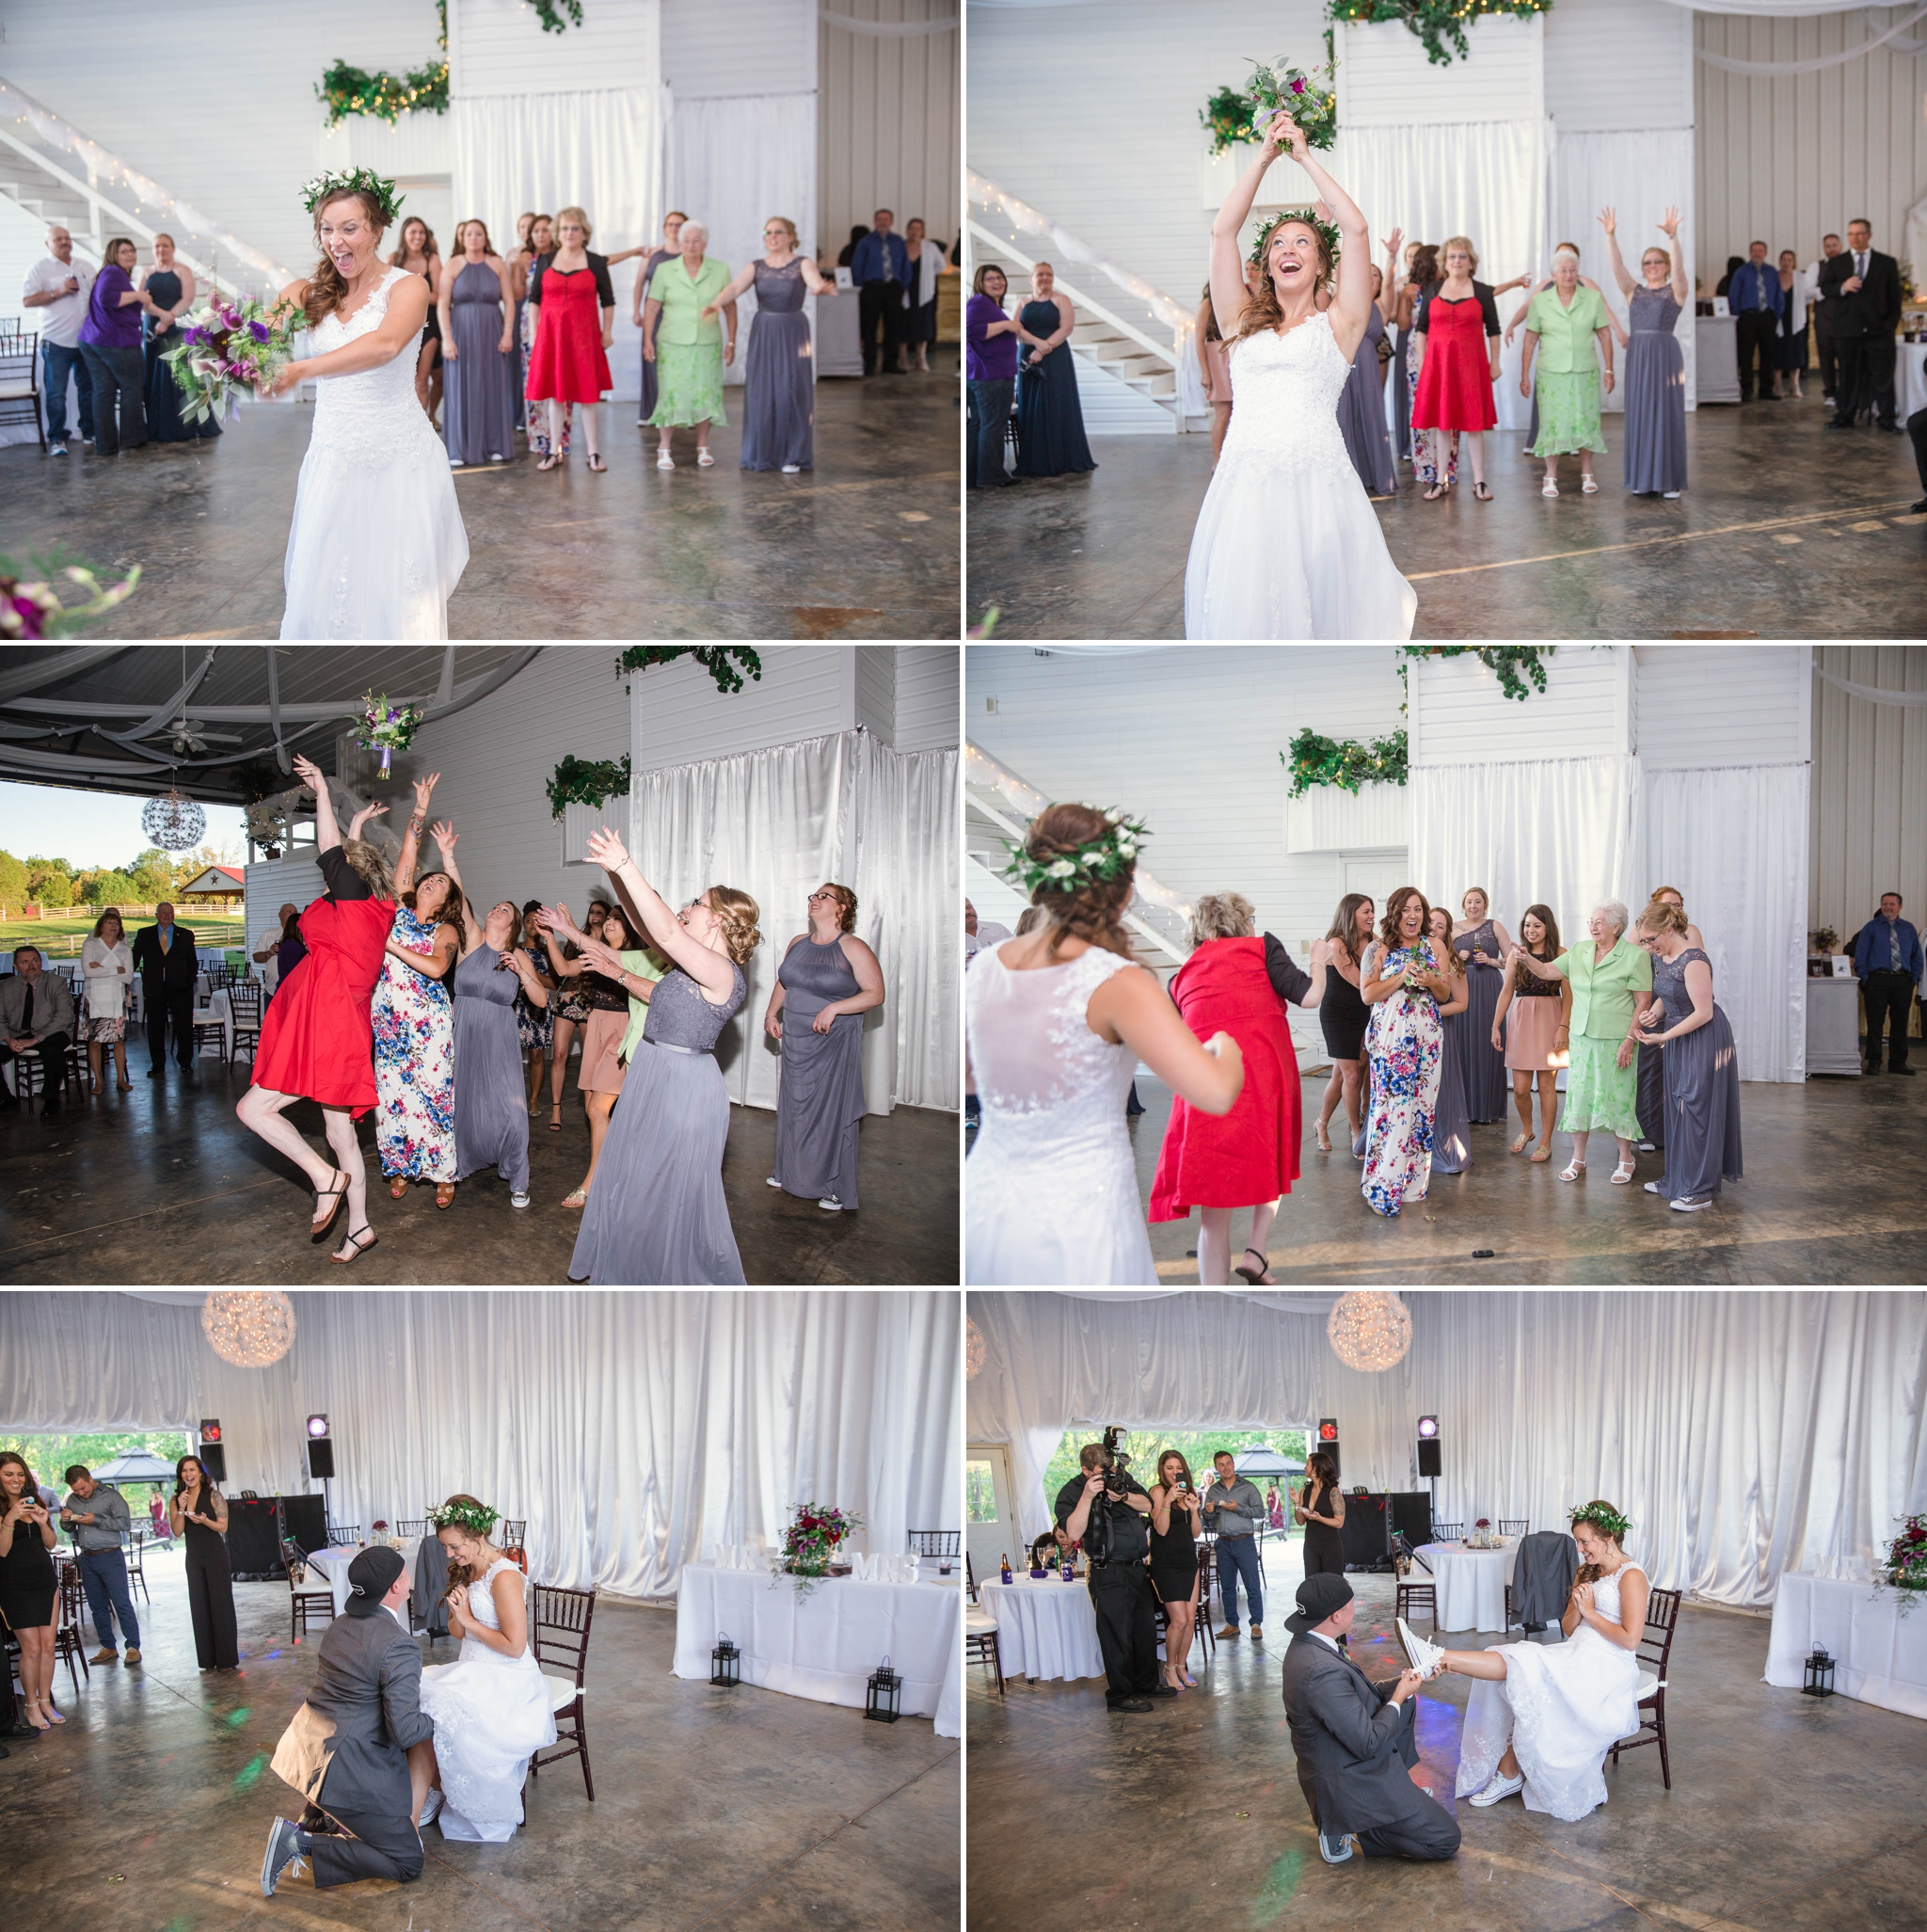 Jessica + Nathan - Wedding at the Lily Pad in Whitsett, NC - Raleigh North Carolina Photographer